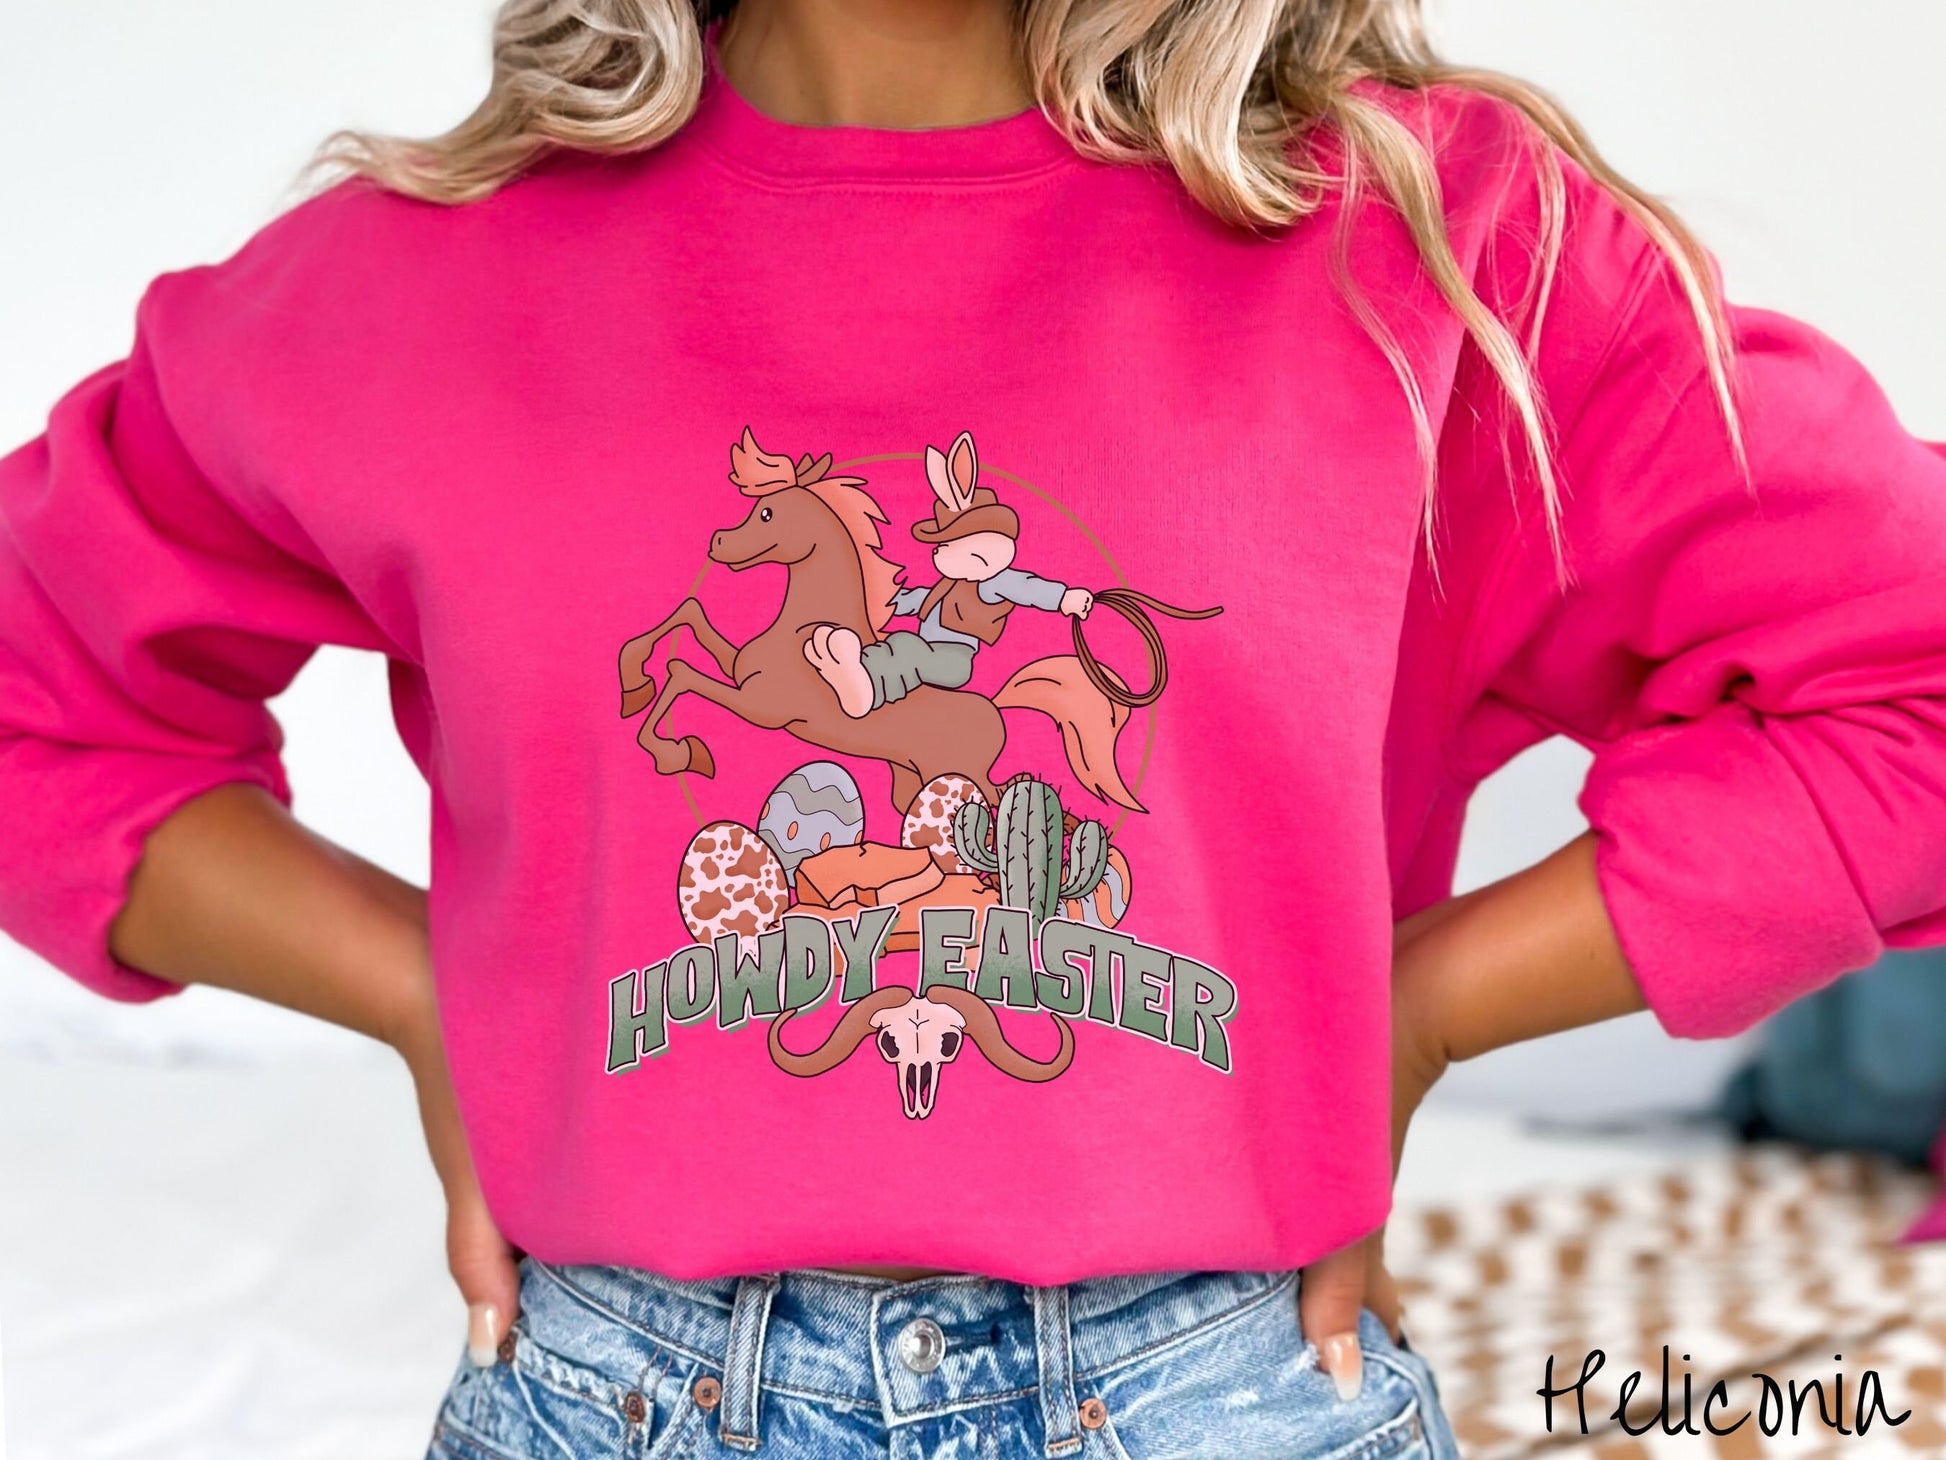 A woman wearing a cute, vintage heliconia colored sweatshirt with a cowboy rabbit riding a bucking, brown horse while holding a lasso rope. Below is green text Howdy Easter along with colorful Easter eggs, a green cactus, and a horned bull skull.